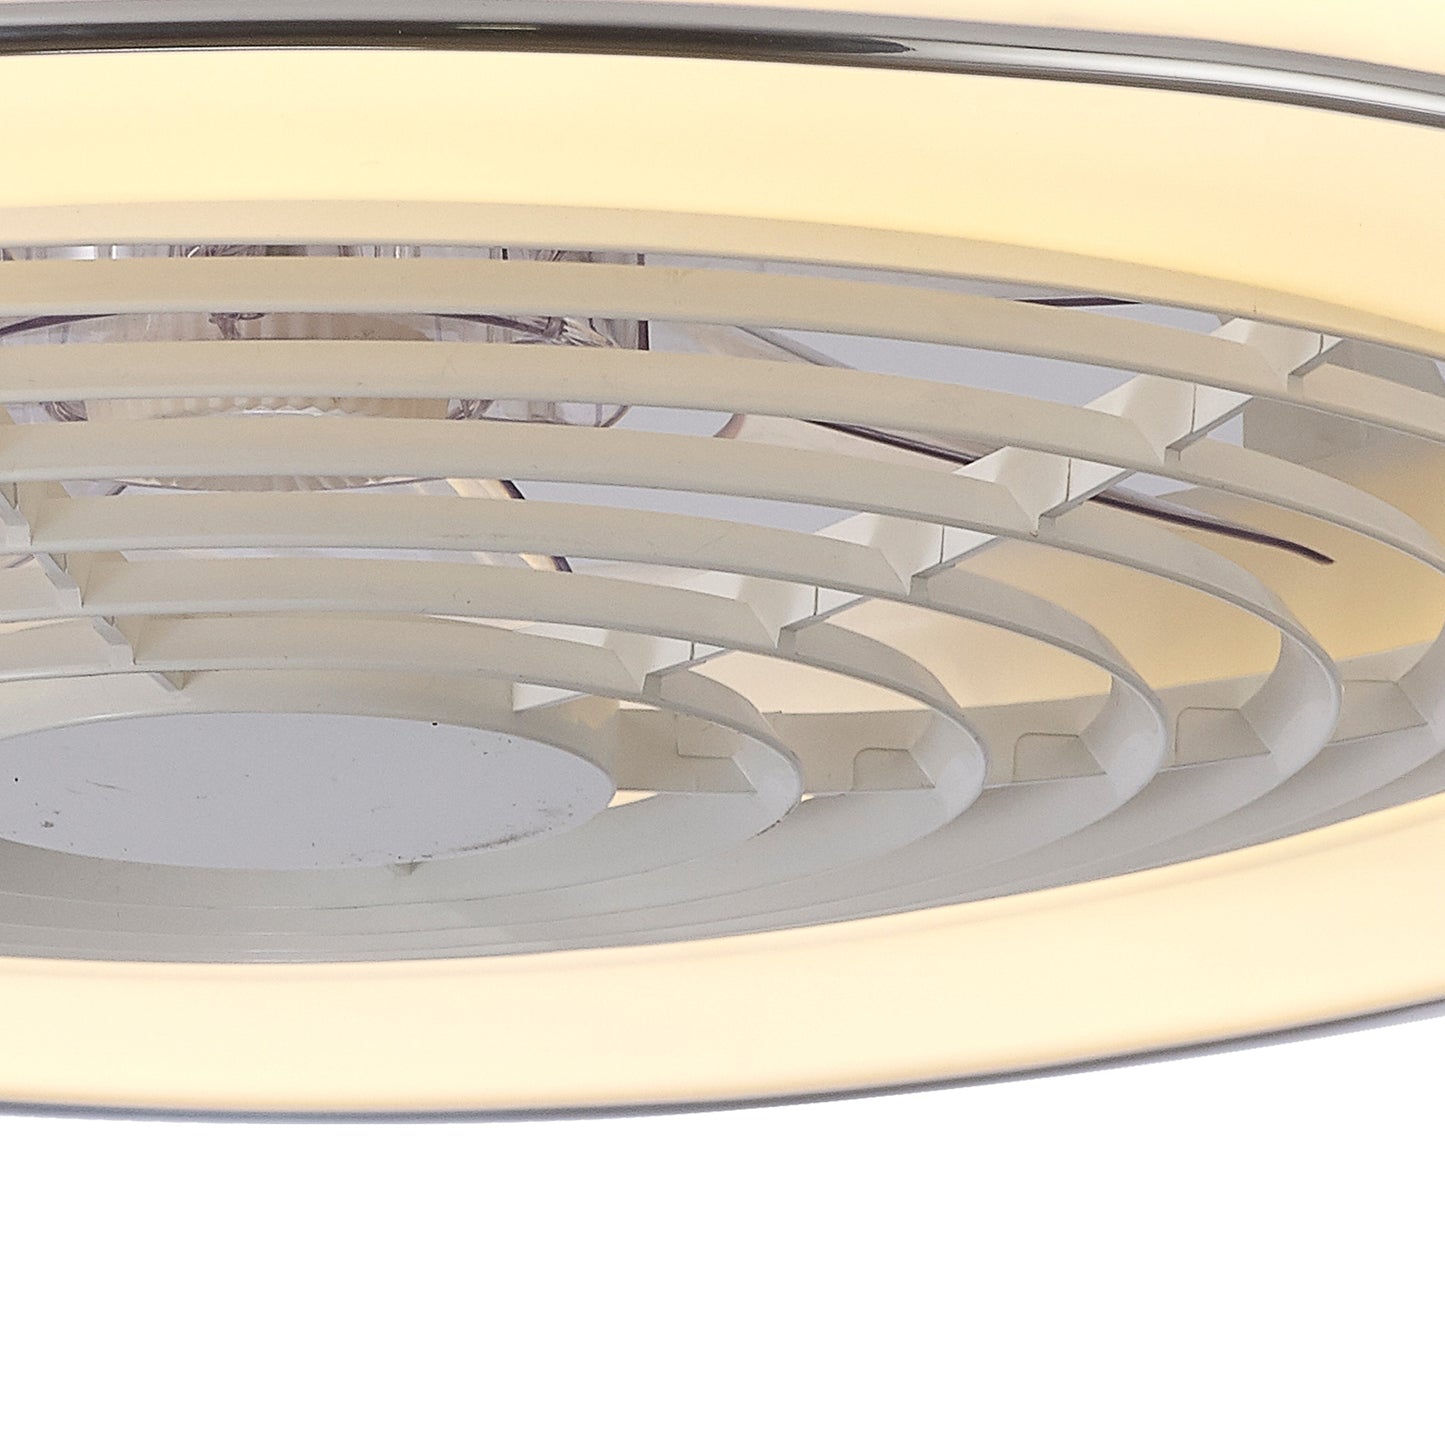 Samoa LED Dimmable Ceiling Light With Built-In Fan - Remote Control